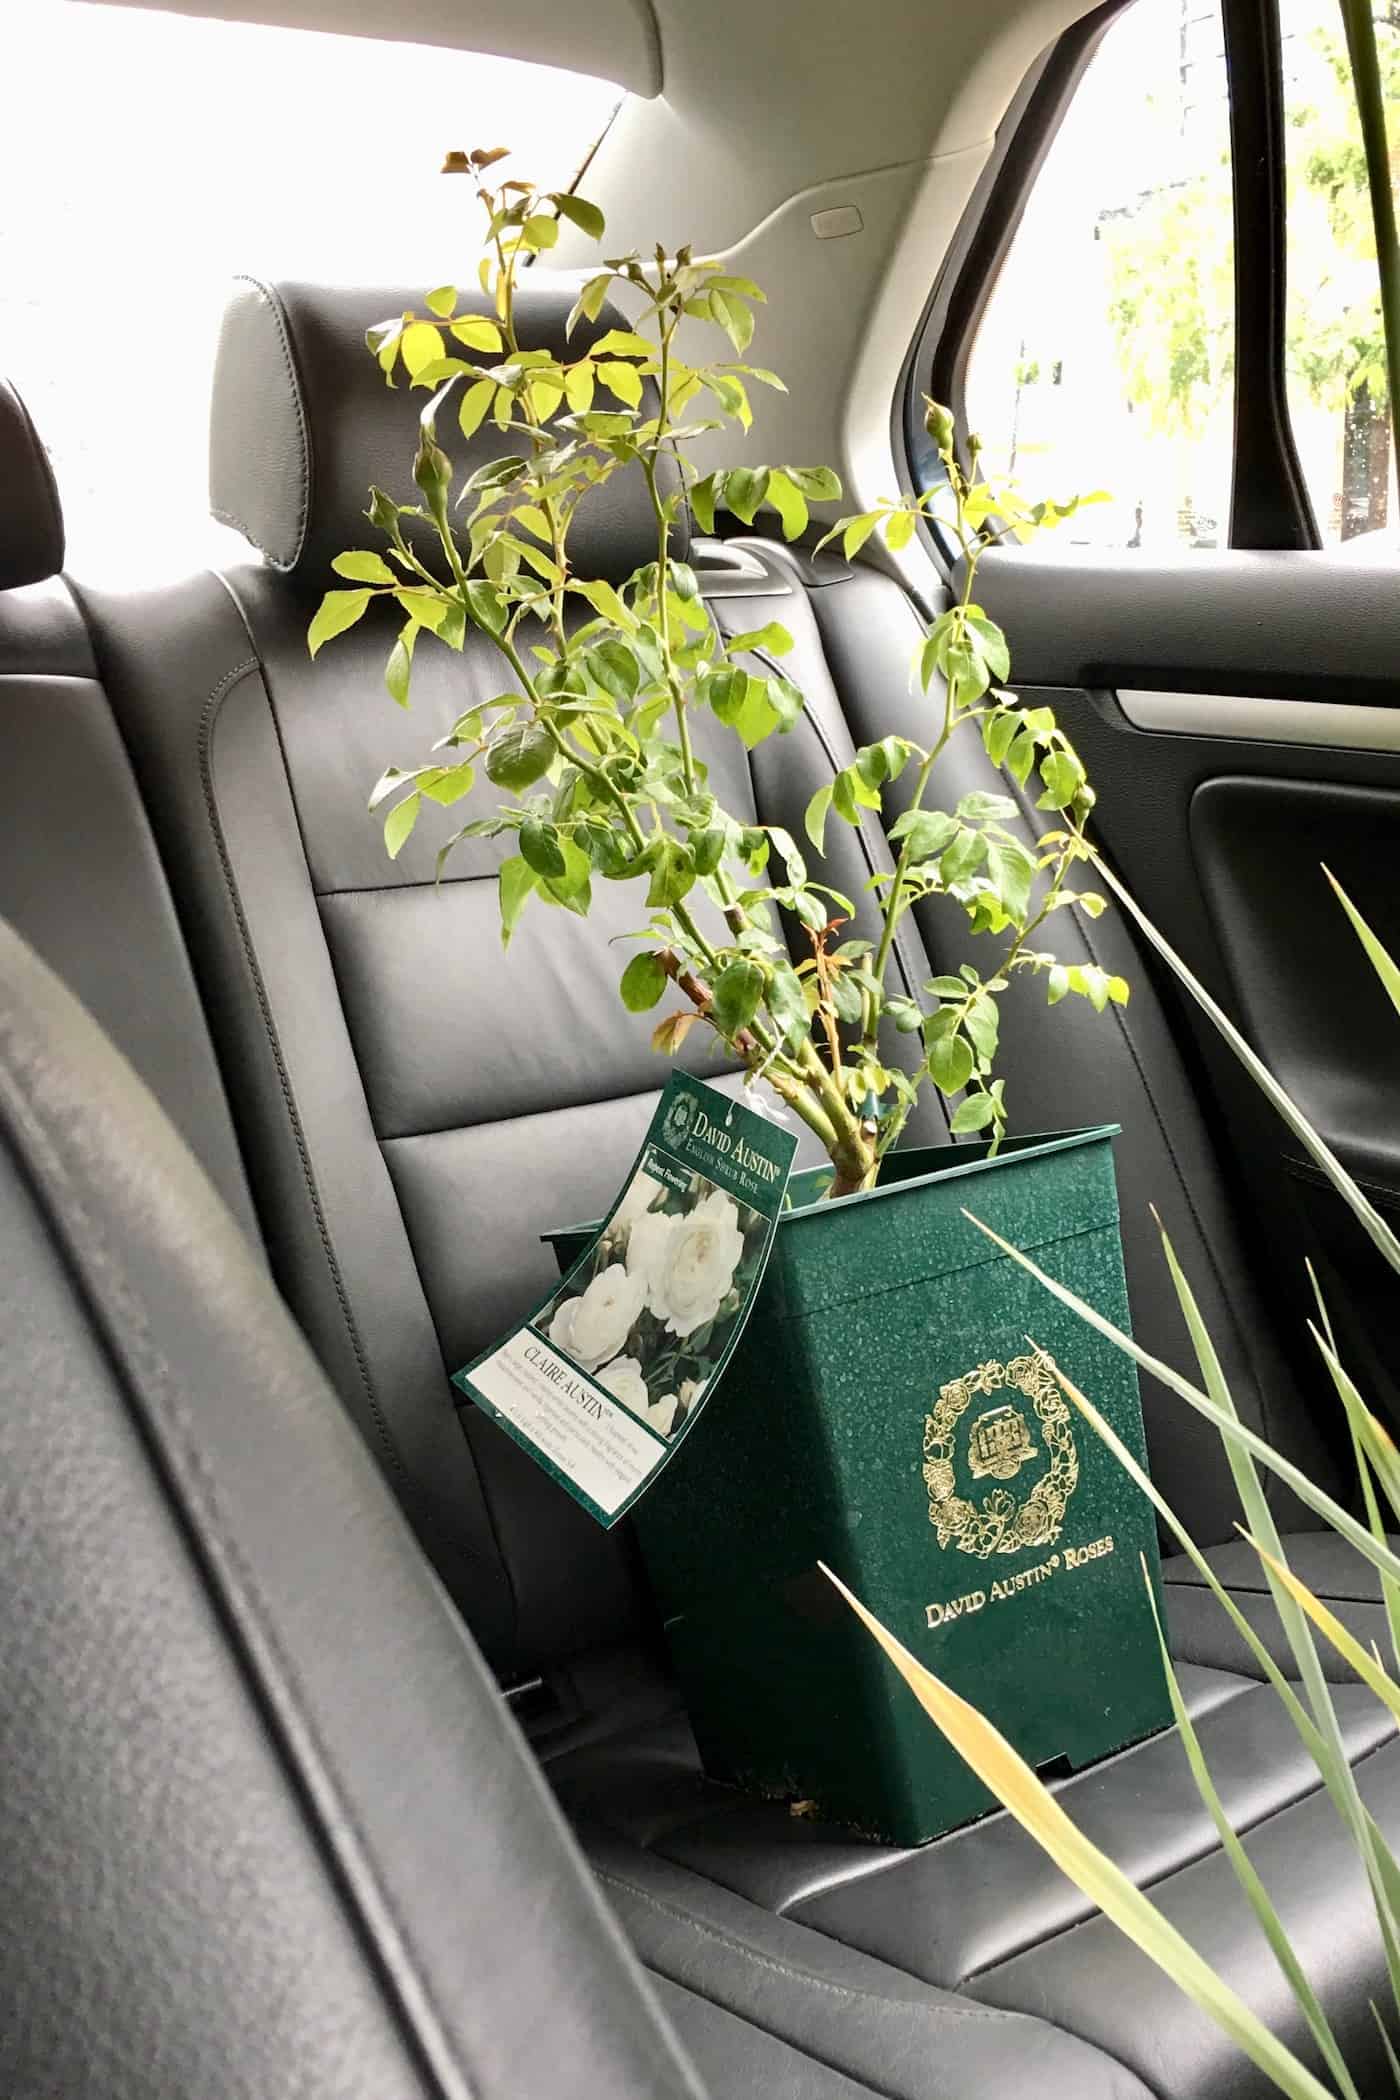 David austin rose plant in car on leather seat